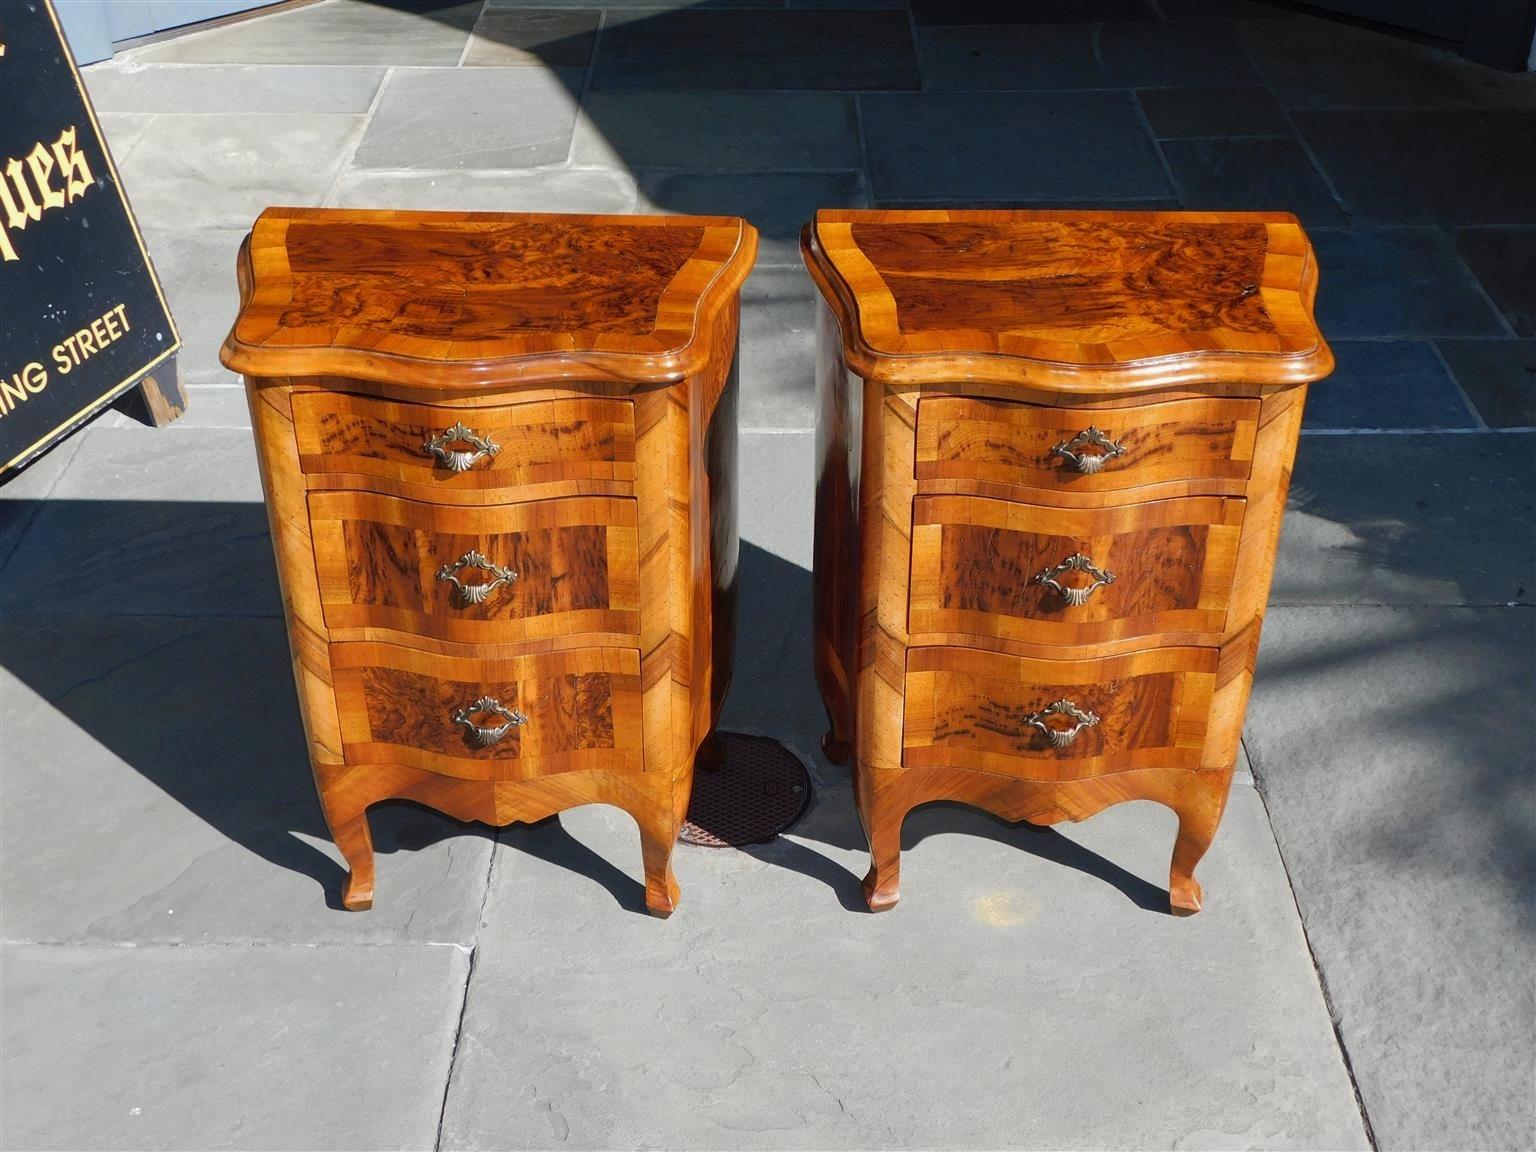 Pair of Italian burl walnut serpentine inlaid three graduated drawer commodes with the original floral shell brasses, flanking serpentine skirts, and resting on the original cabriole legs. Mid 19th century.